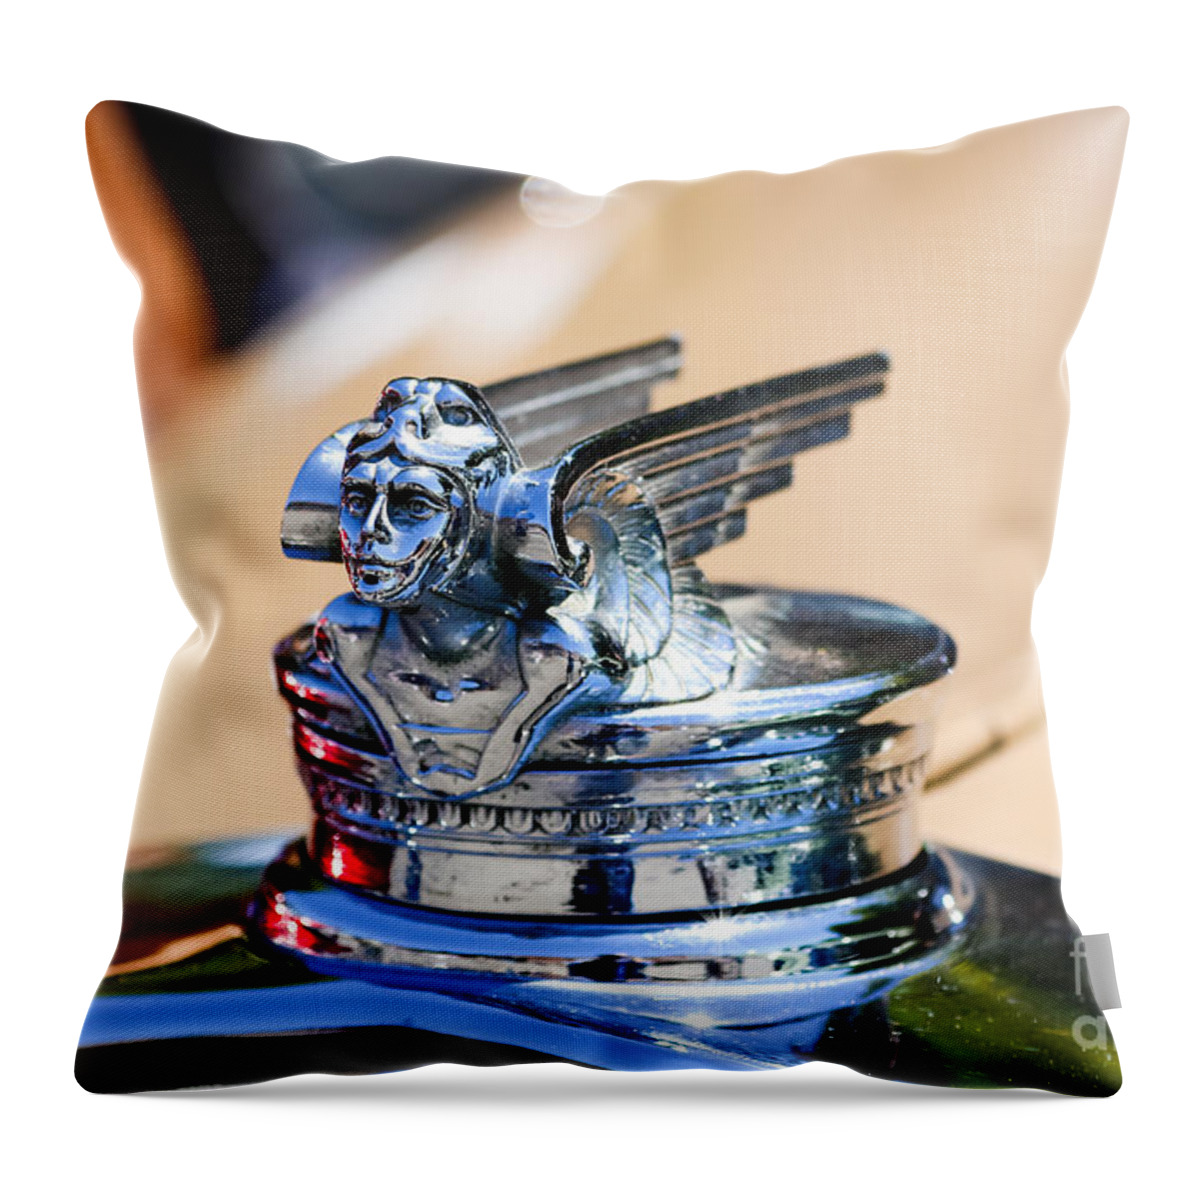 Cars Throw Pillow featuring the photograph Hood Ornament by Vivian Krug Cotton